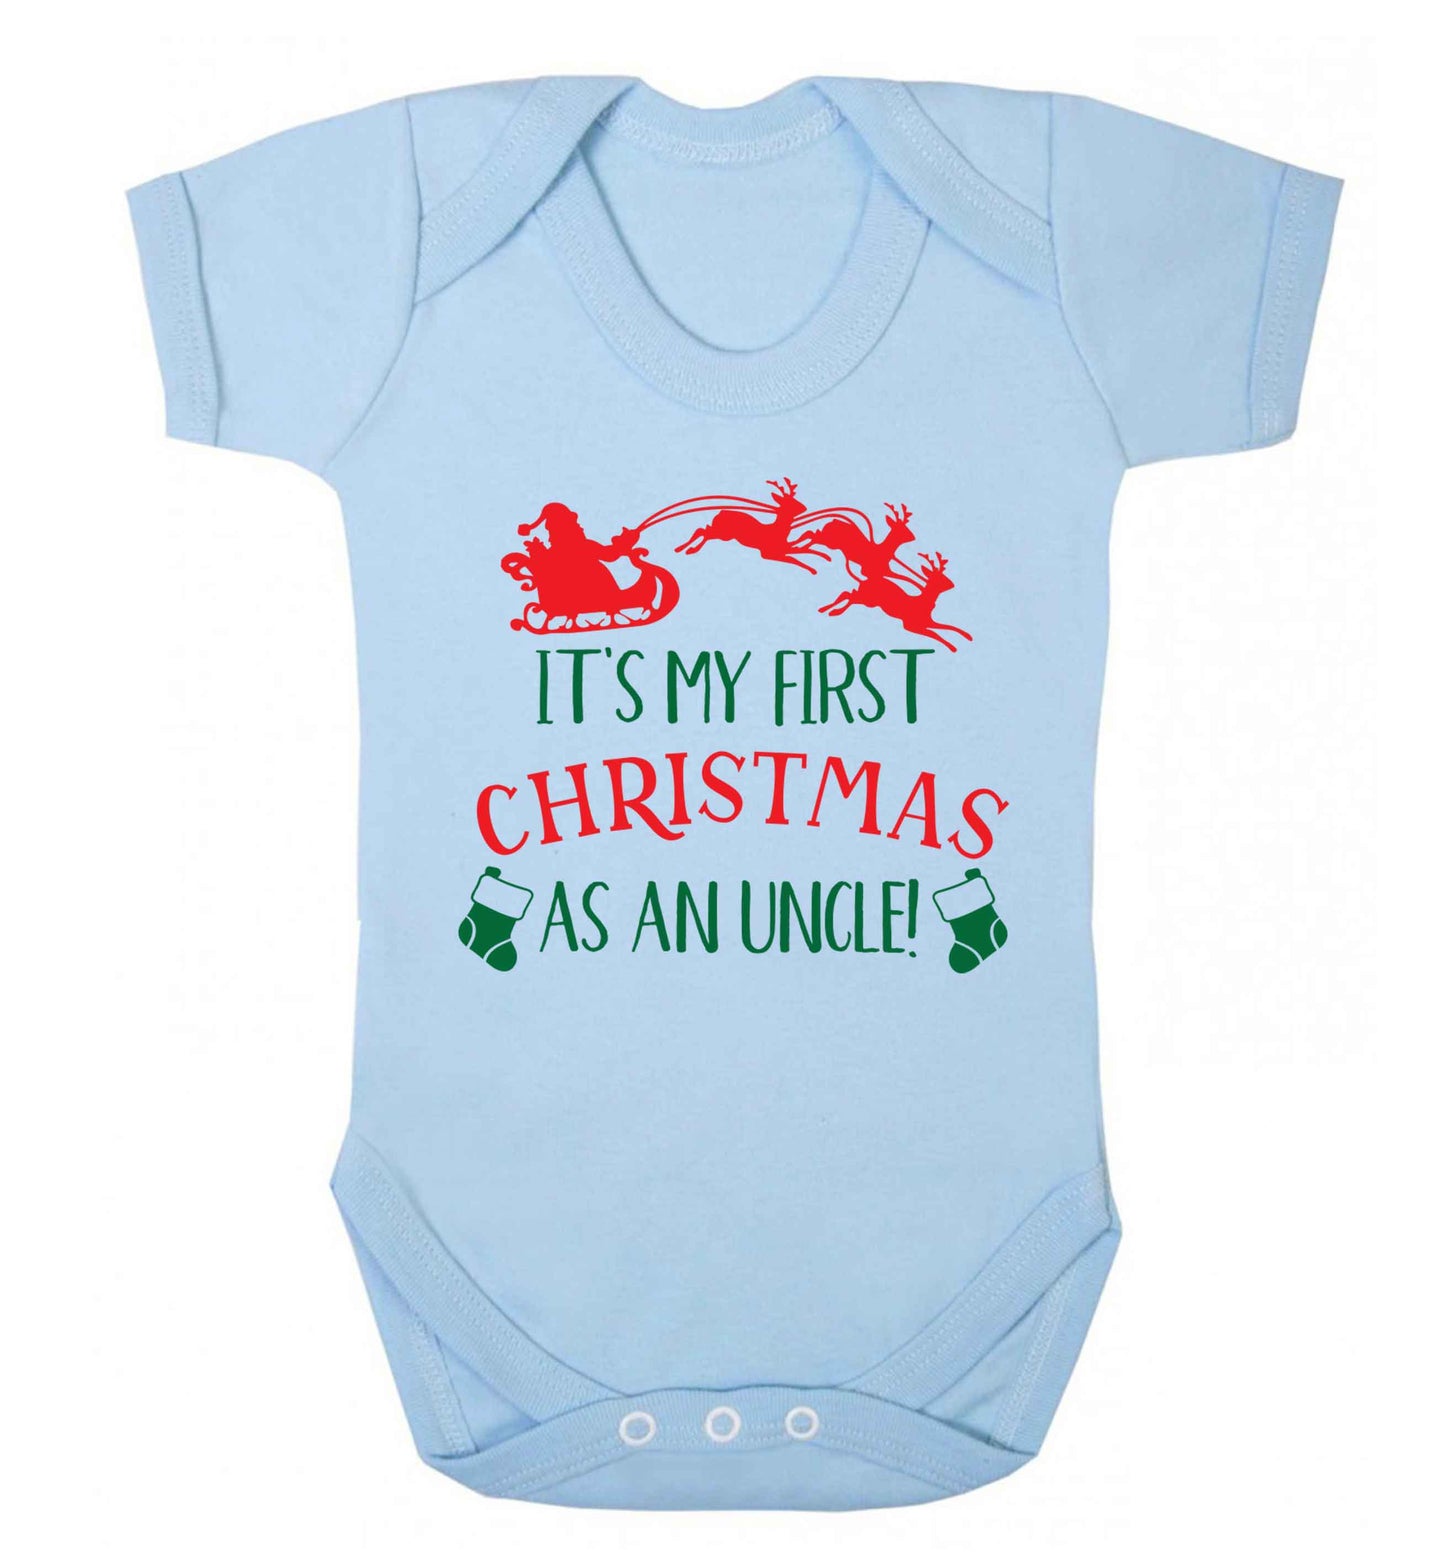 It's my first Christmas as an uncle! Baby Vest pale blue 18-24 months